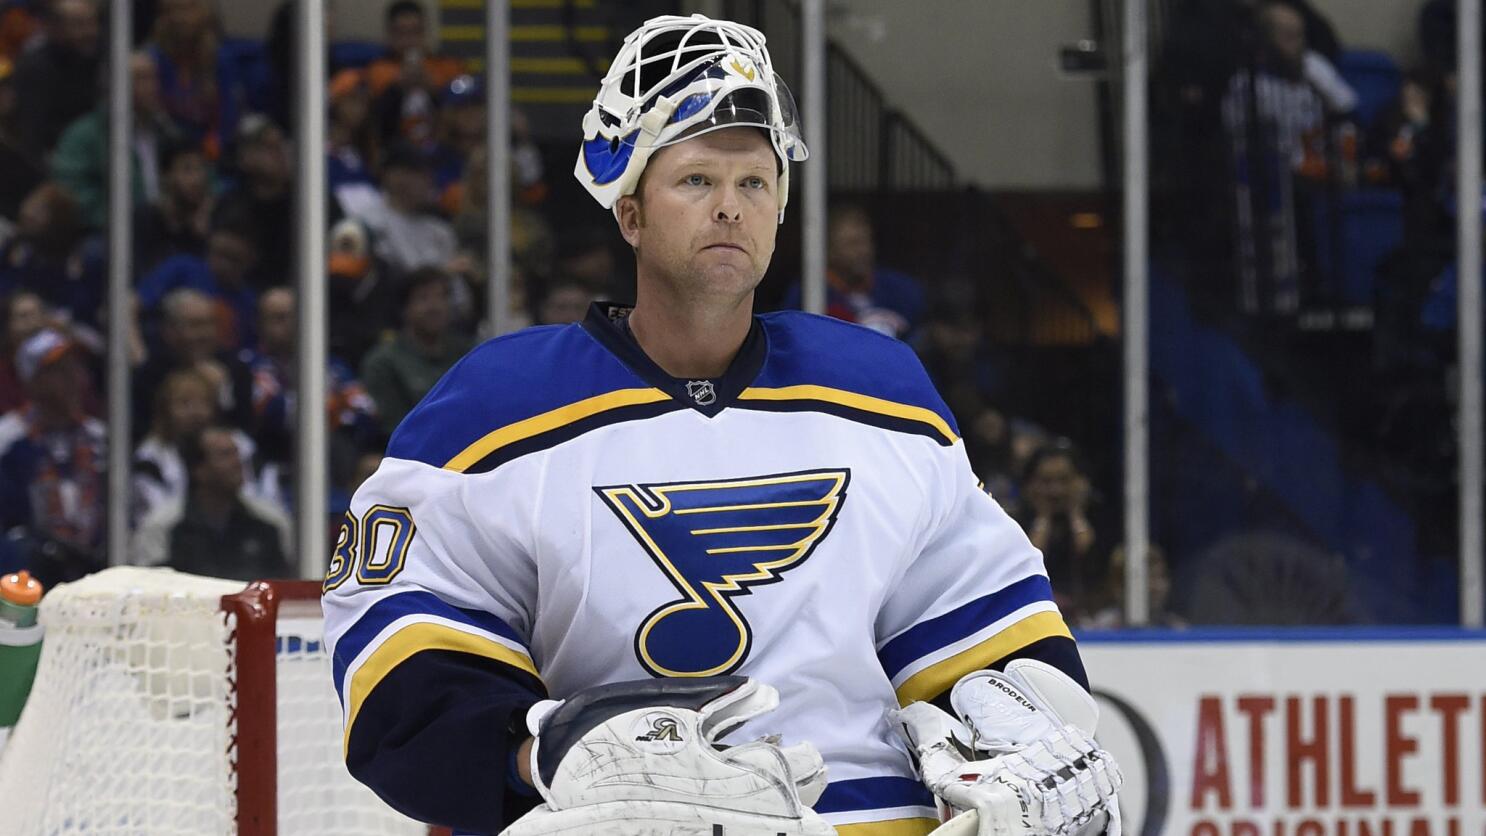 Martin Brodeur is also the only goalie credited with a game